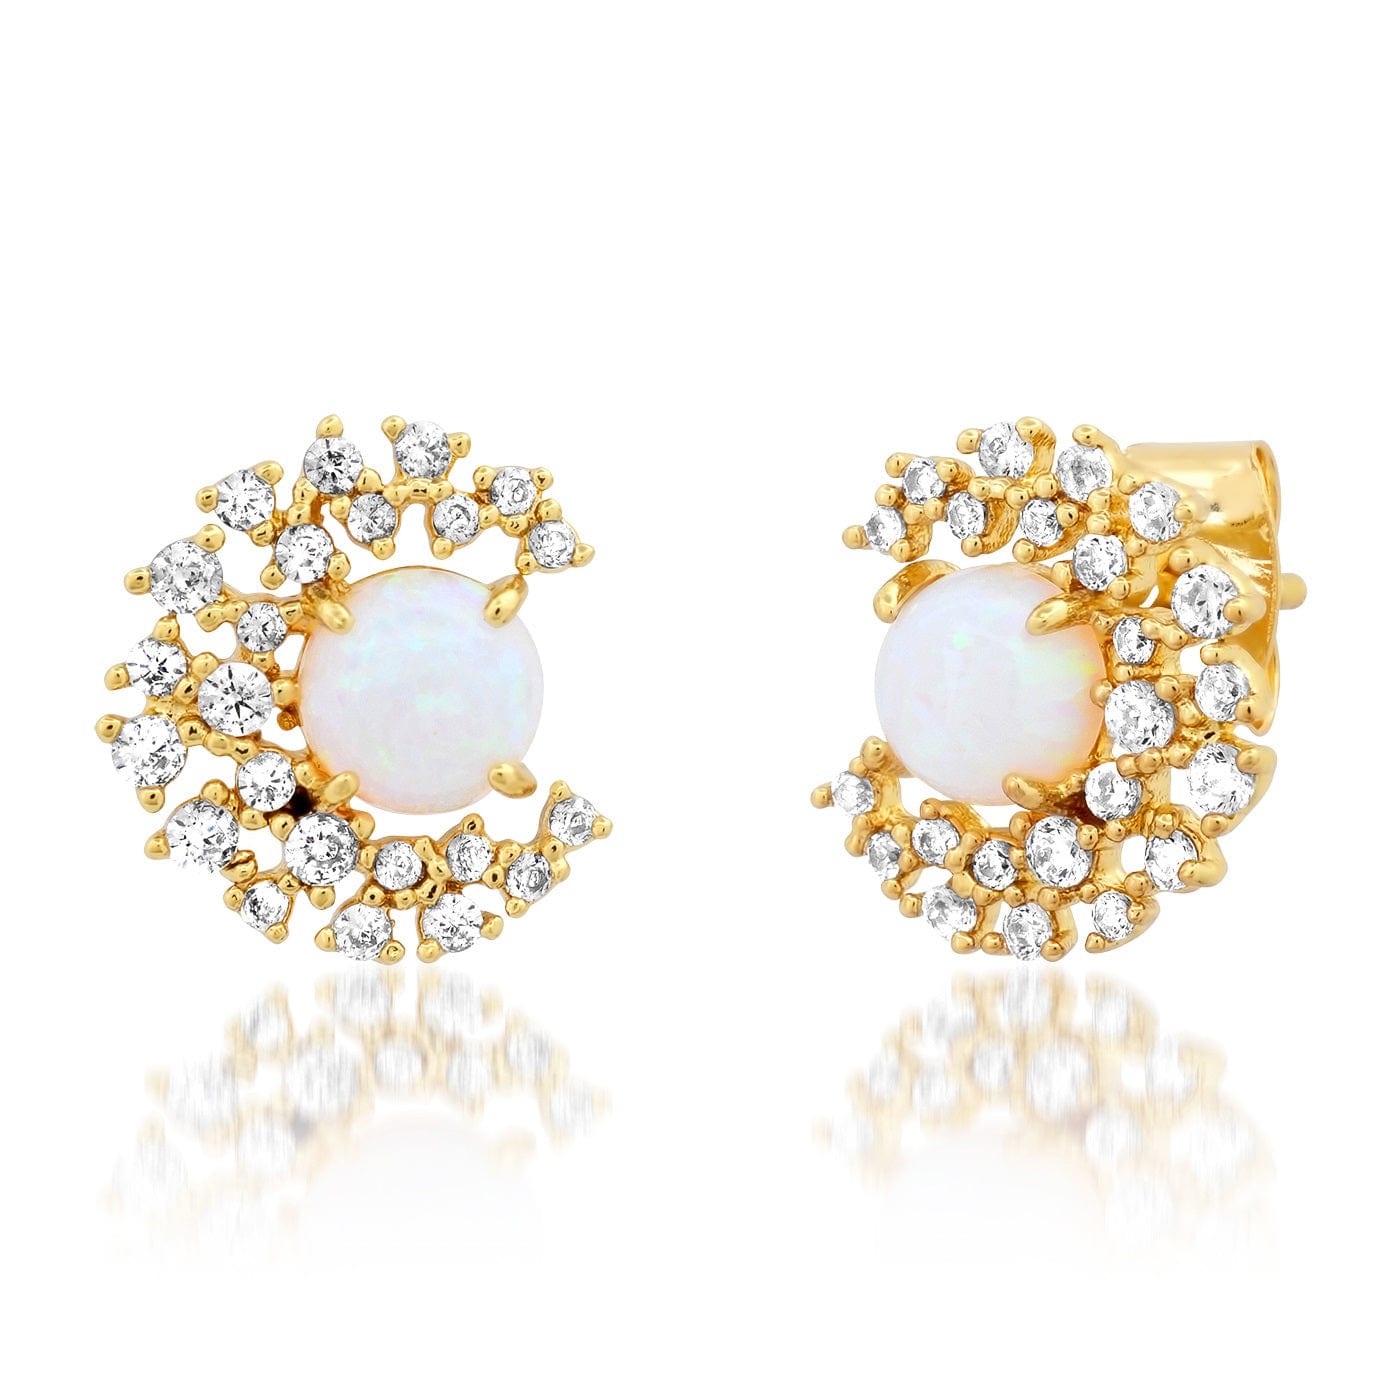 TAI JEWELRY Earrings Pave CZ Crescent with Opal Stone